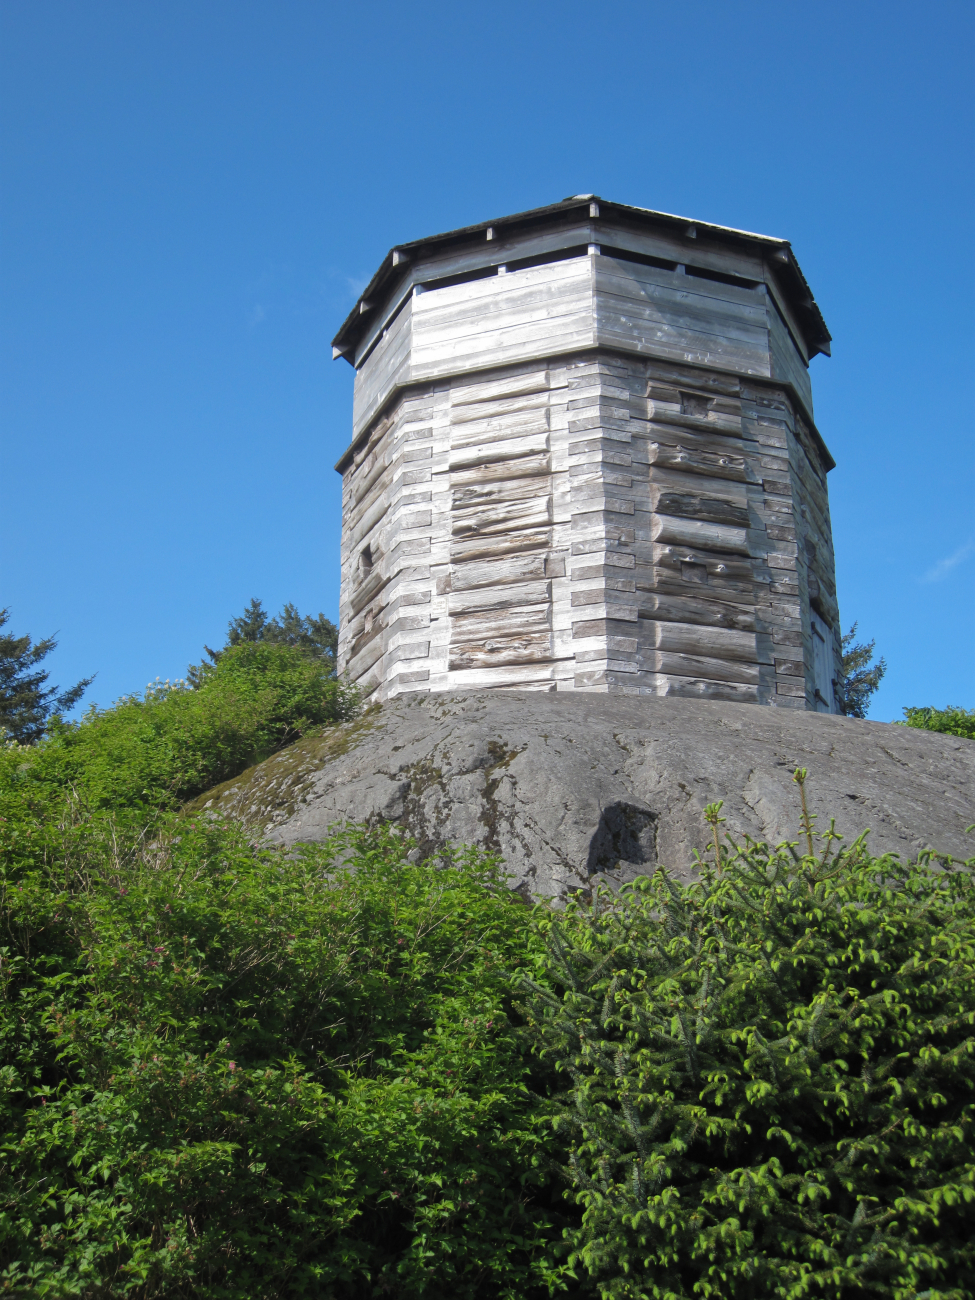 Replica of the  Russian blockhouse at Sitka that was originally located inside a Russian stockade